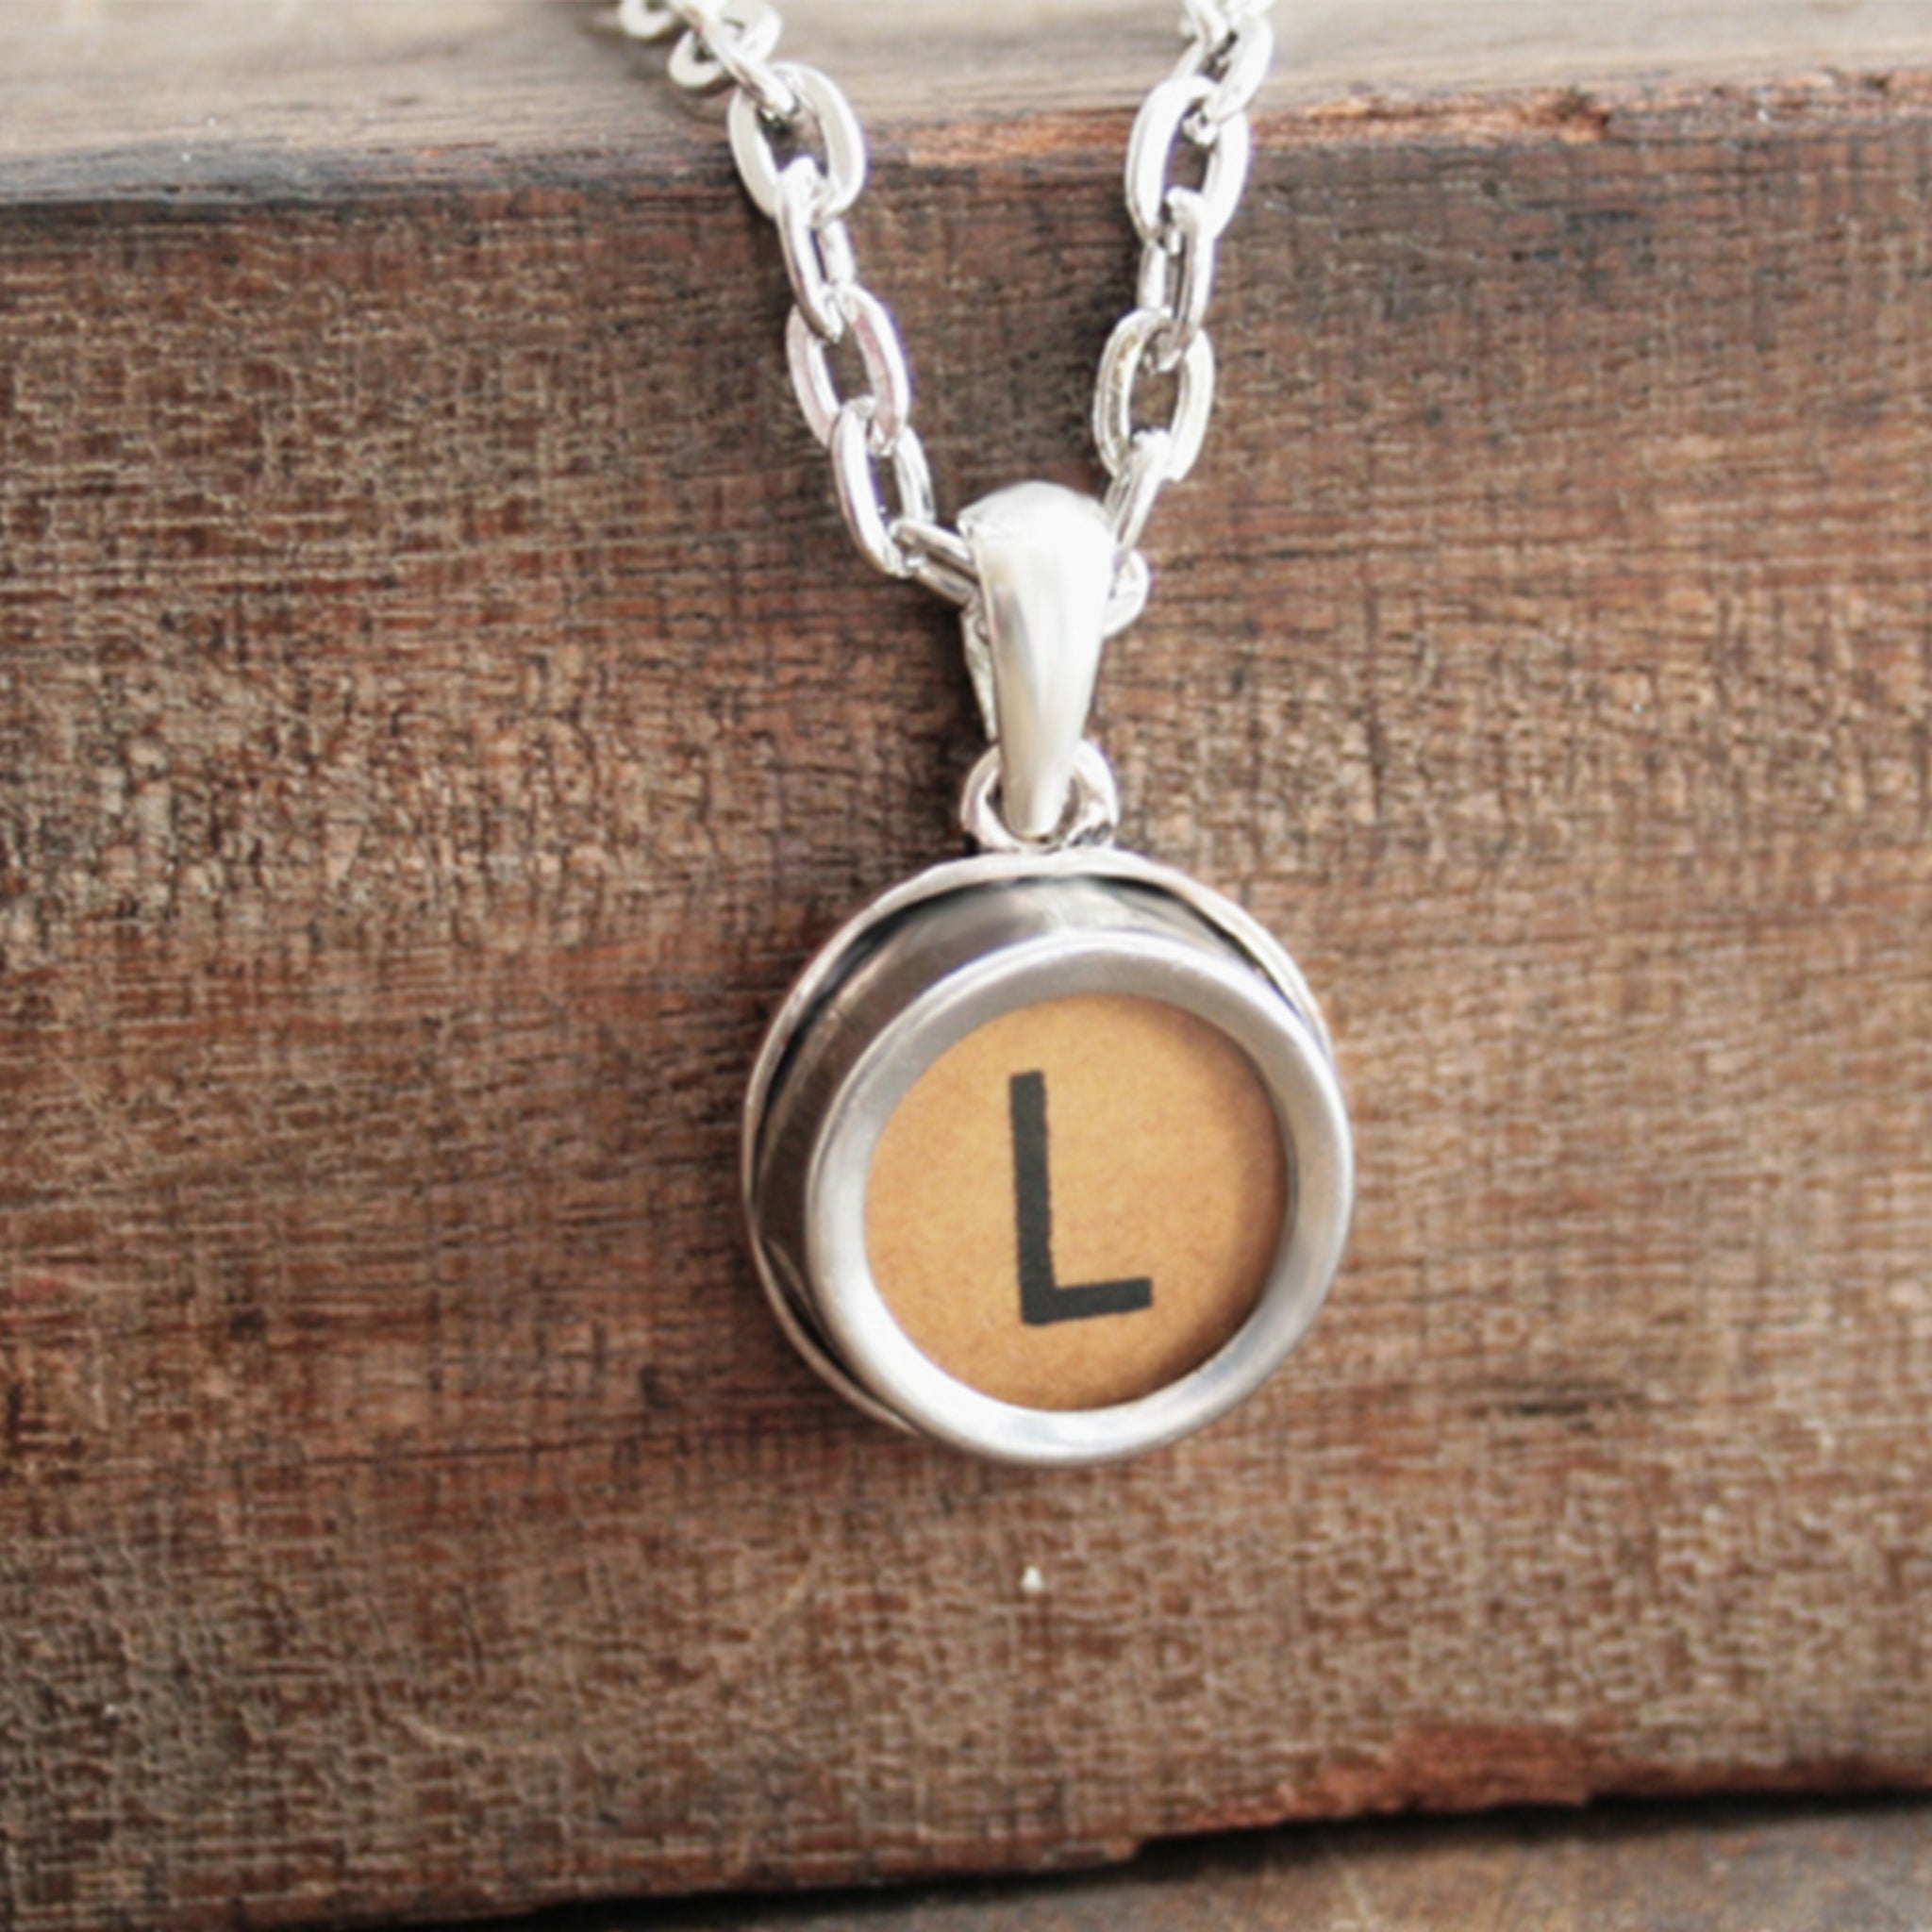 Brown L initial necklace made of real typewriter key